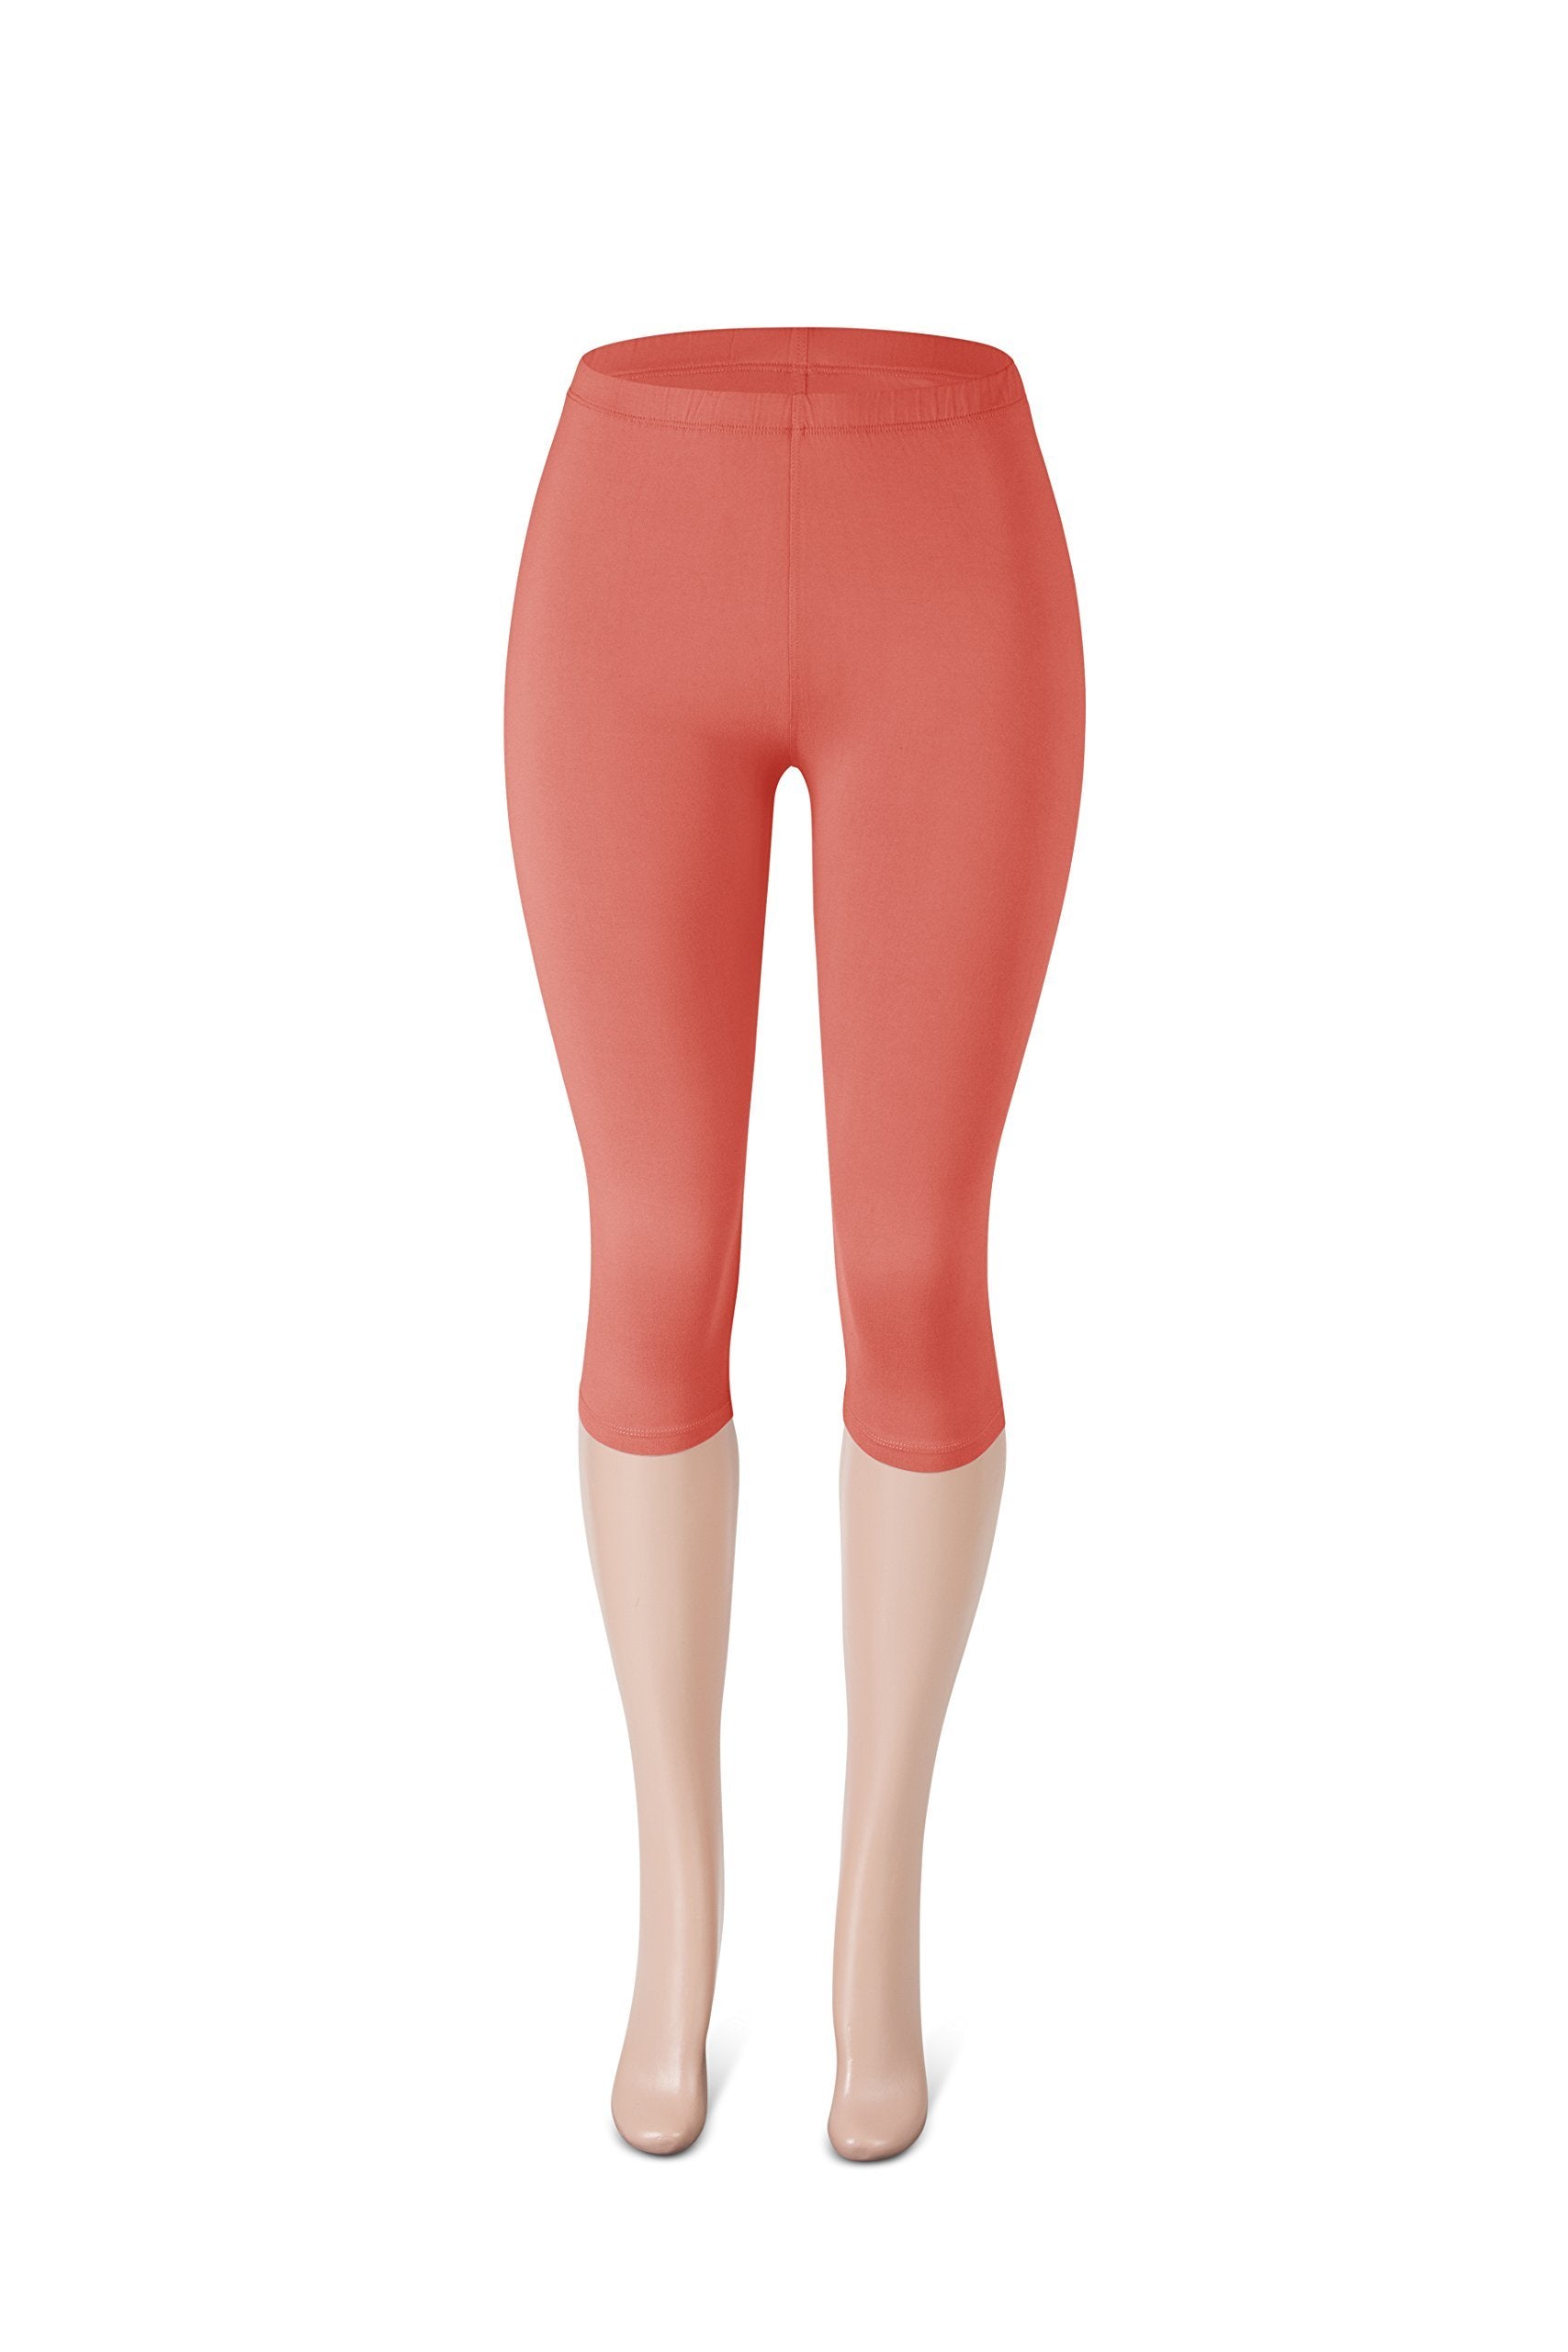 SATINA High Waisted Leggings for Women | Capri | 1 Inch Waistband (One Size, Coral)